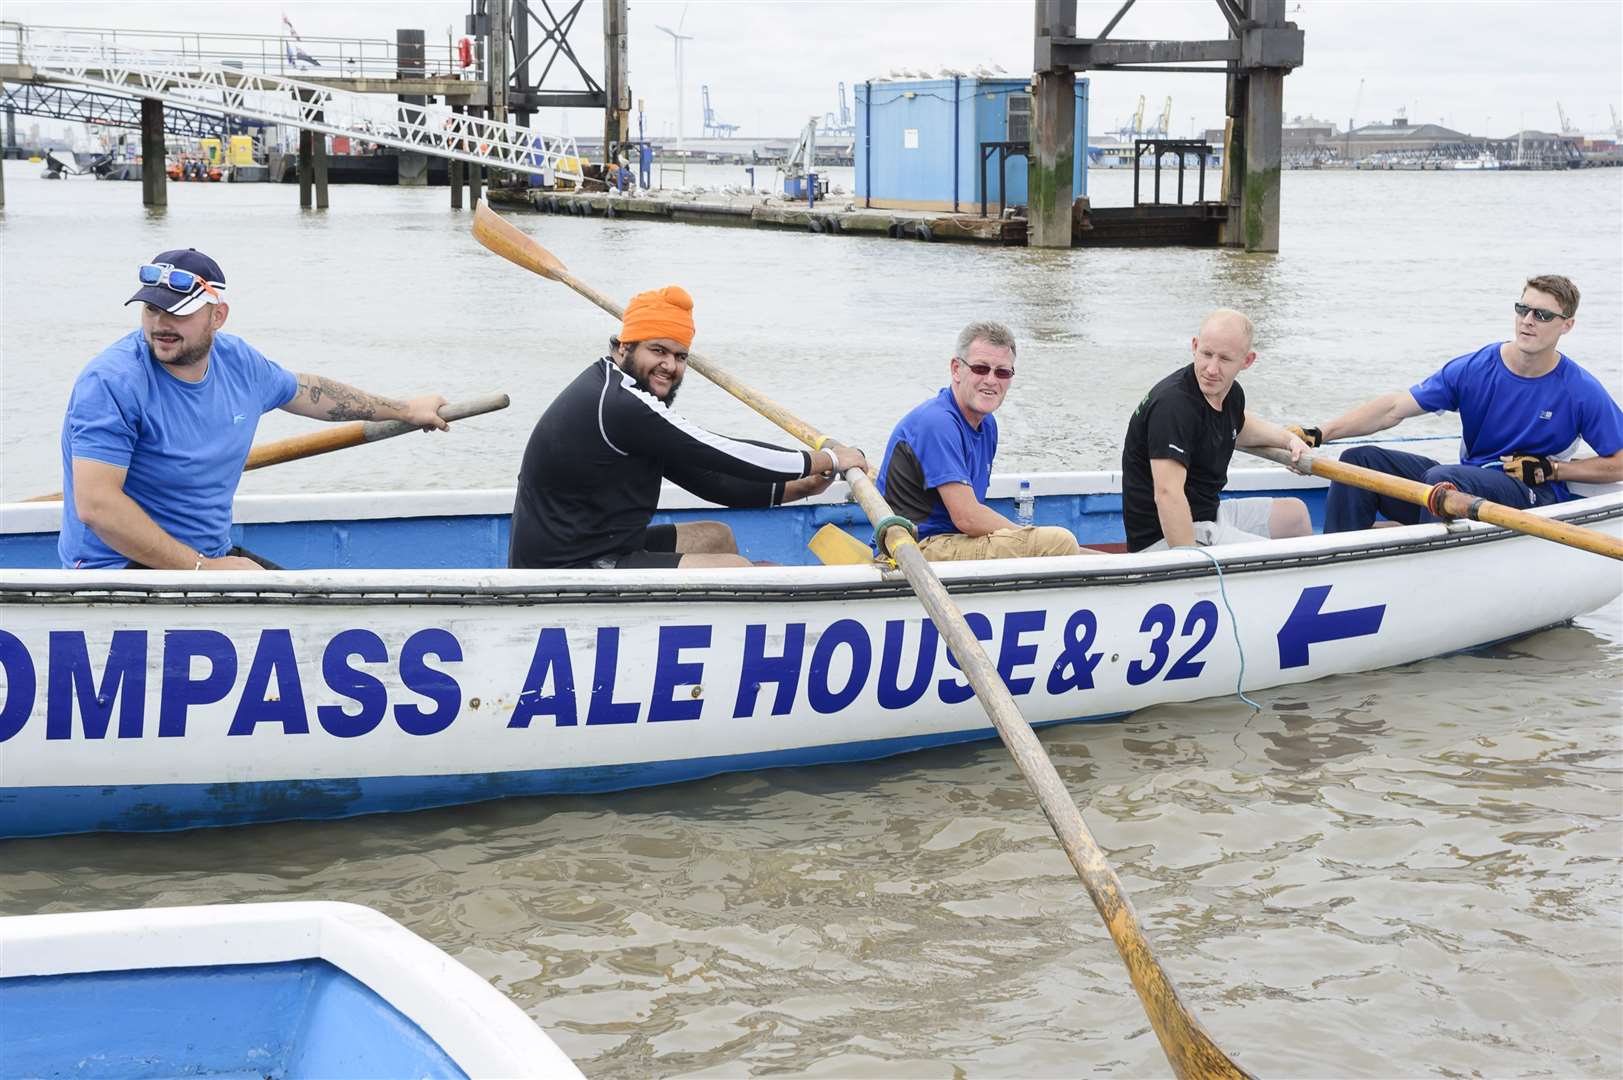 From left: Craig Mercer, Gurps Singh, Guy Bishop, Shane Cleaver, and David Louth at the 2016 regatta. Picture: Andy Payton